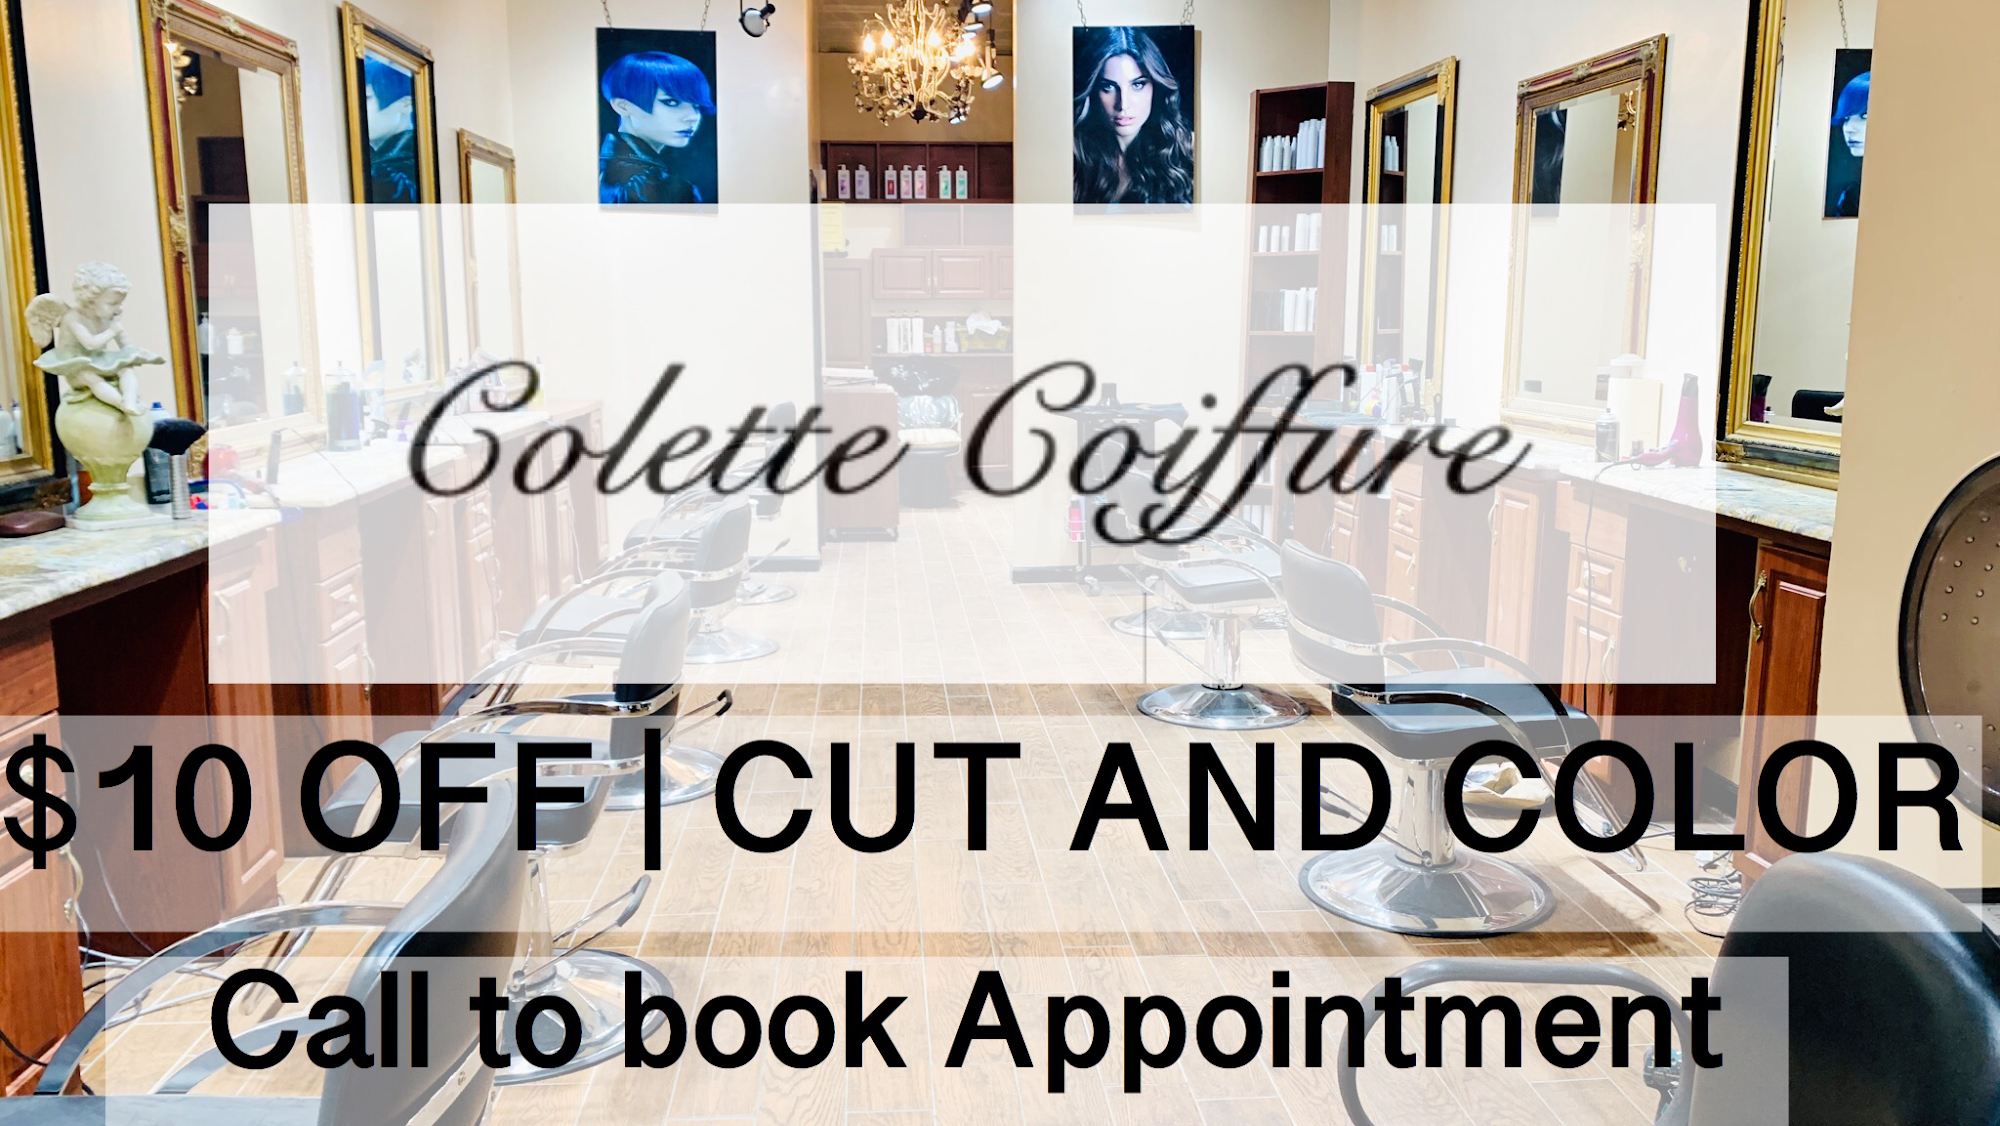 Colette Coiffure 1017 Broadway, Woodmere New York 11598